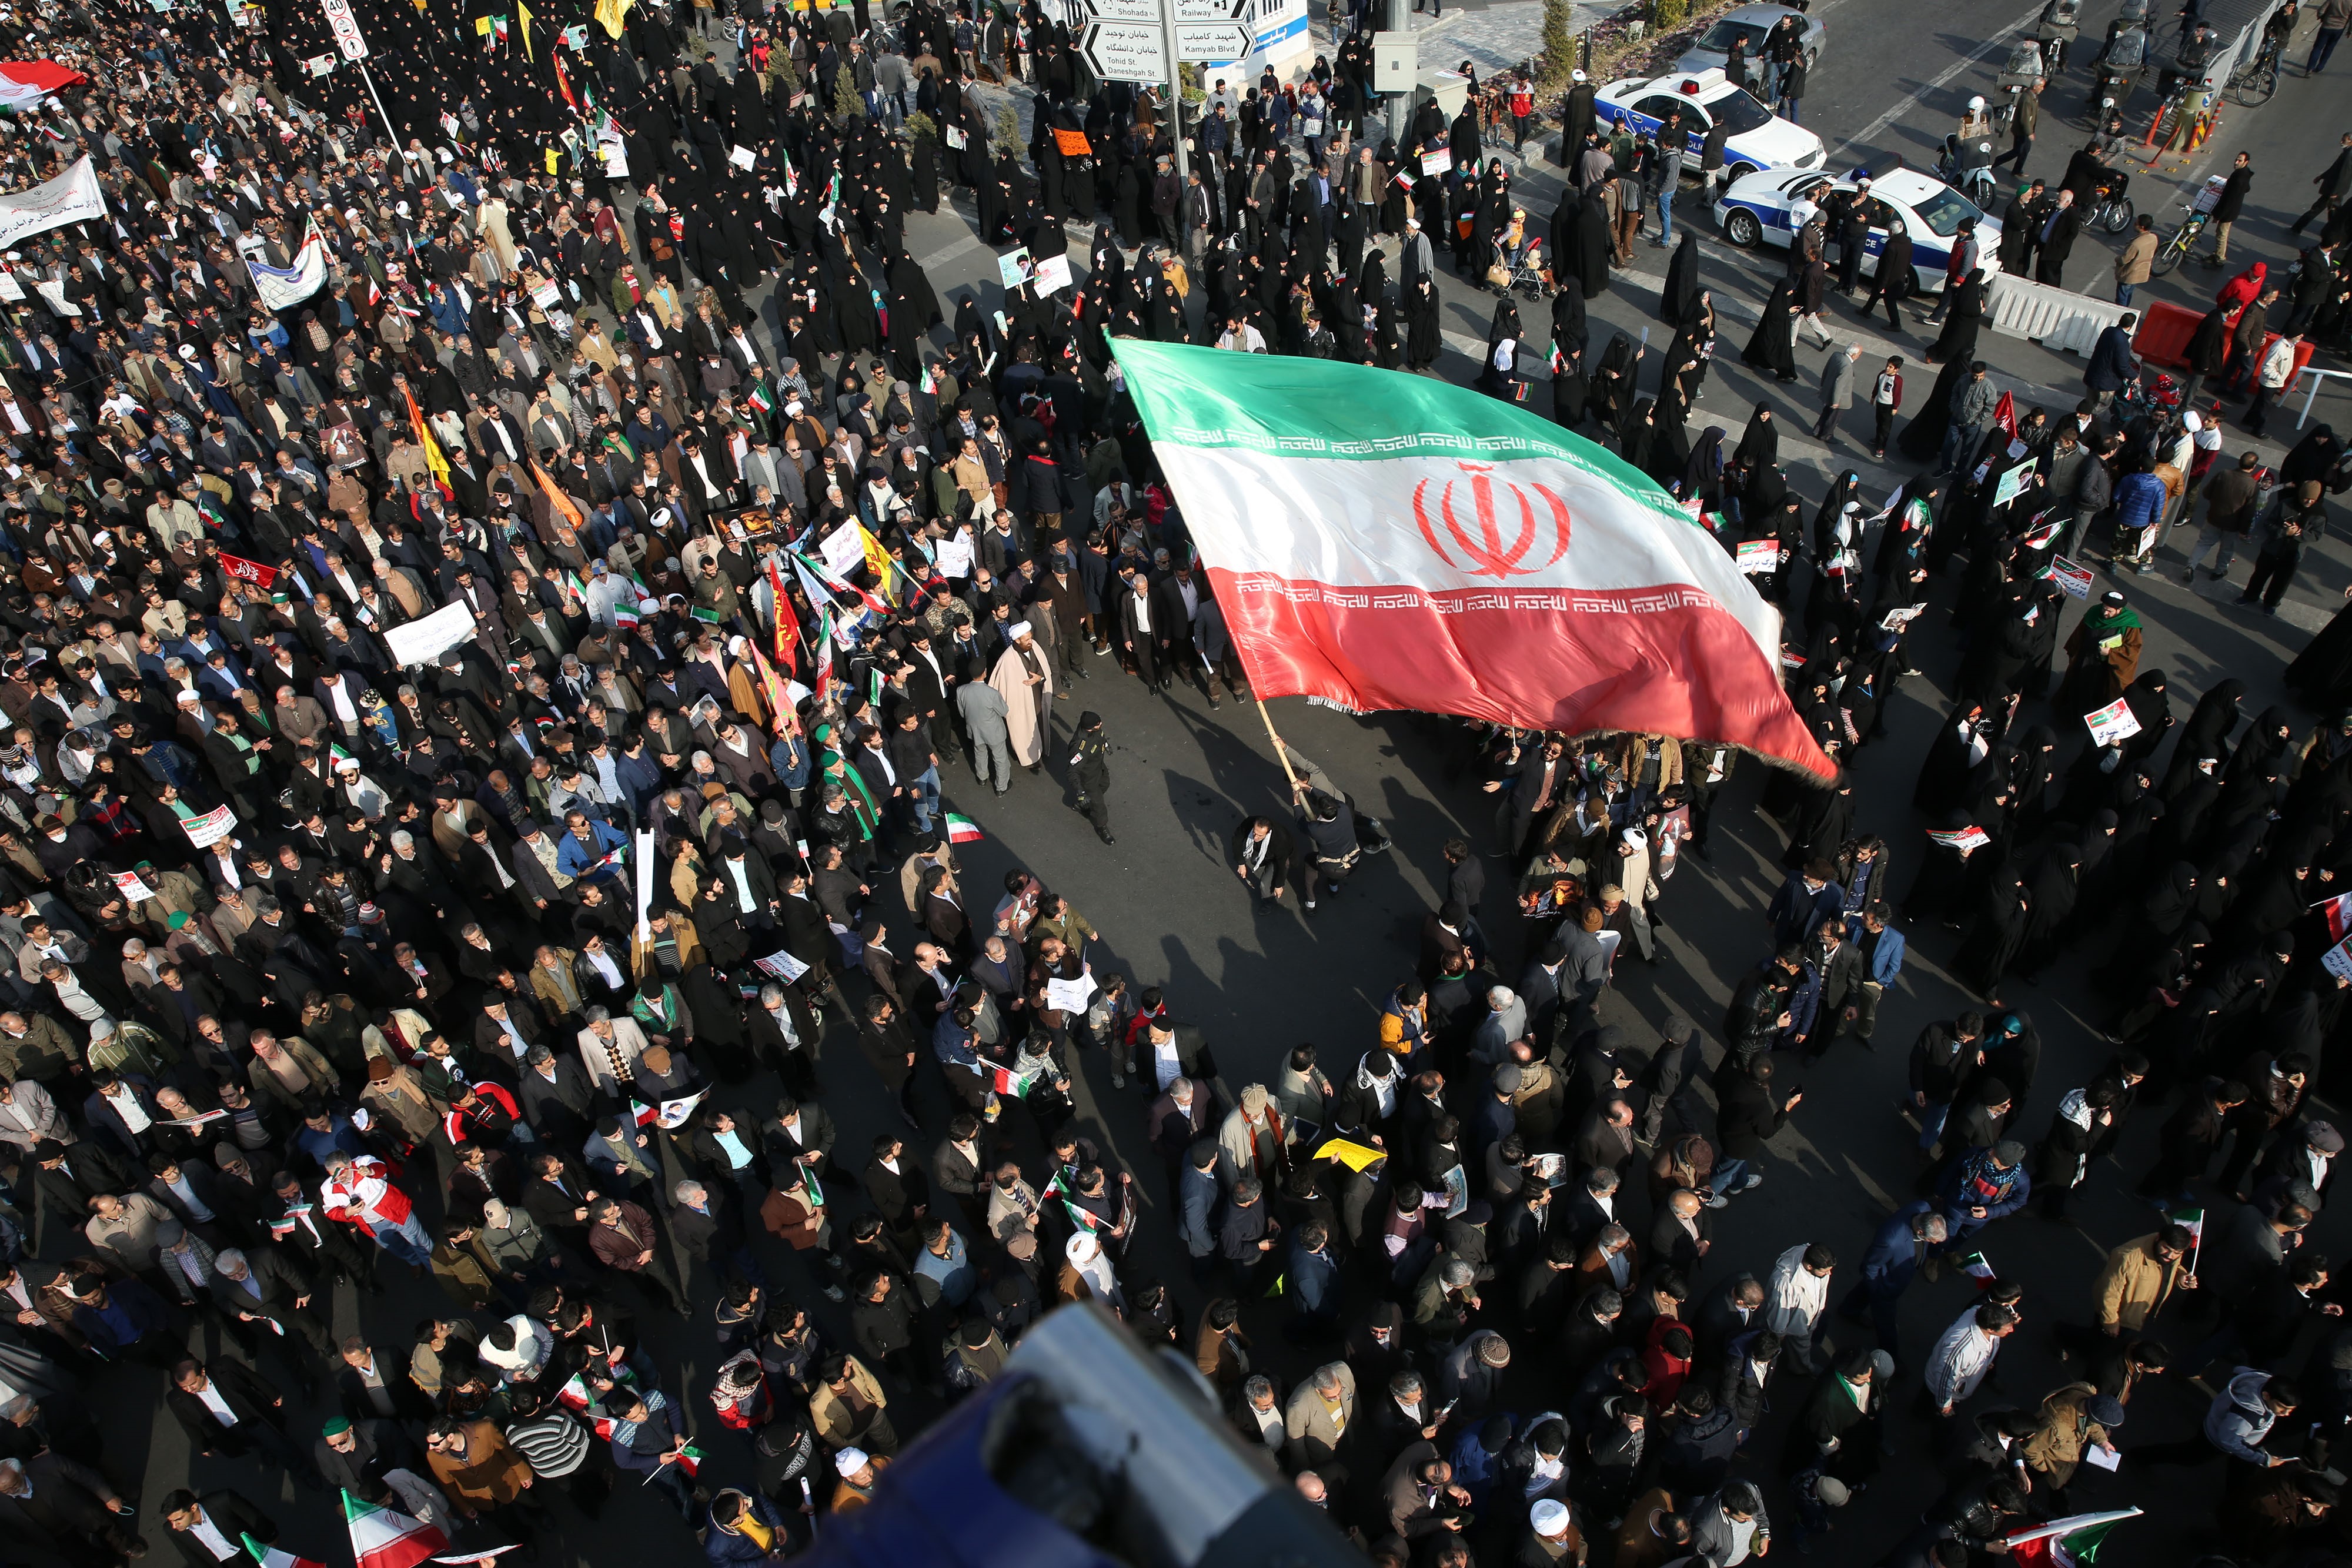 Thousands of Iranians hold banners and posters as they take part in a pro-government rally in Mashhad, Iran on January 4, 2018. (Nima Najafzadeh—Anadolu Agency/Getty Images)